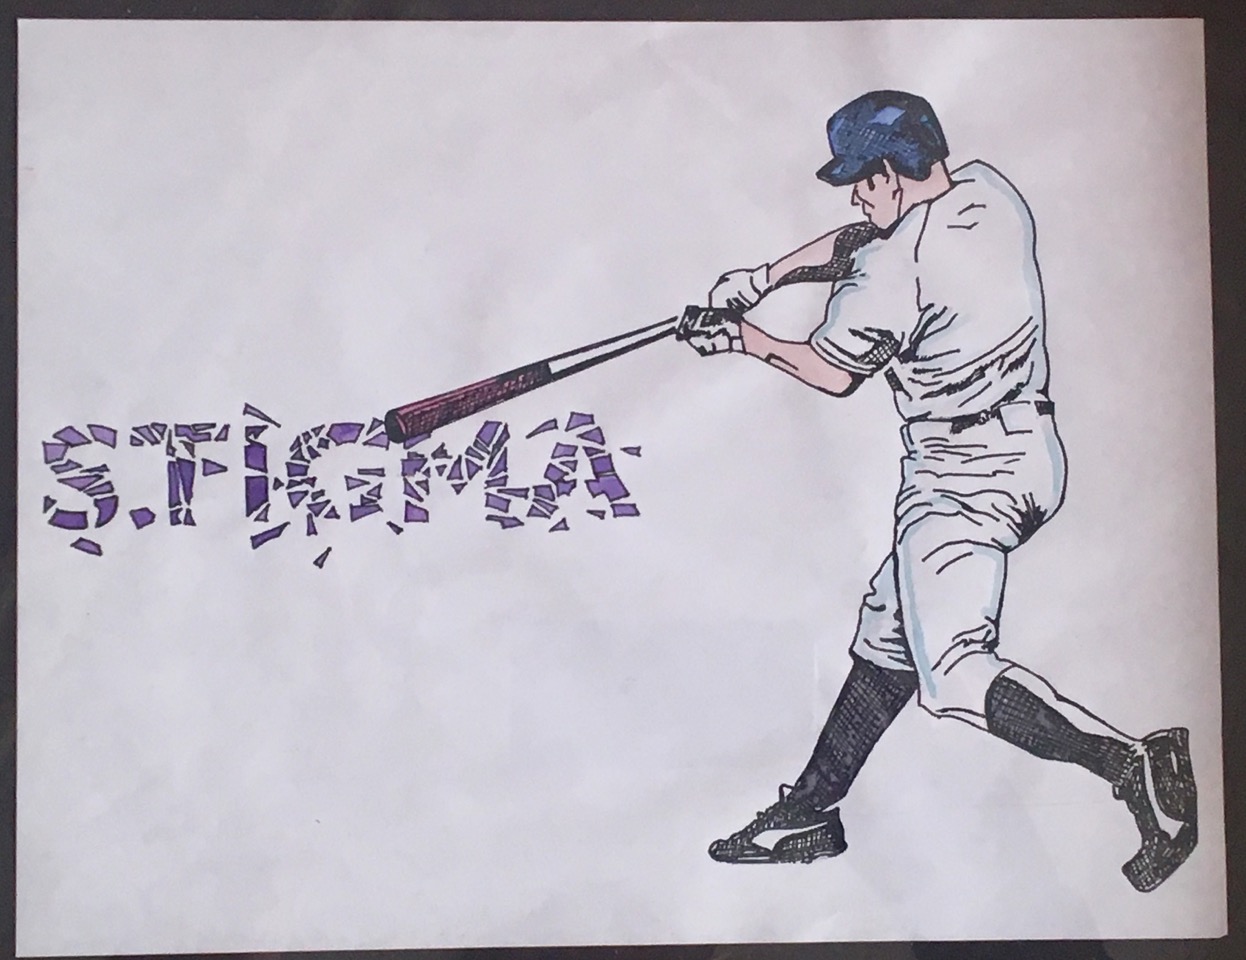 Drawing of baseball player shattering the word stigma with his bat